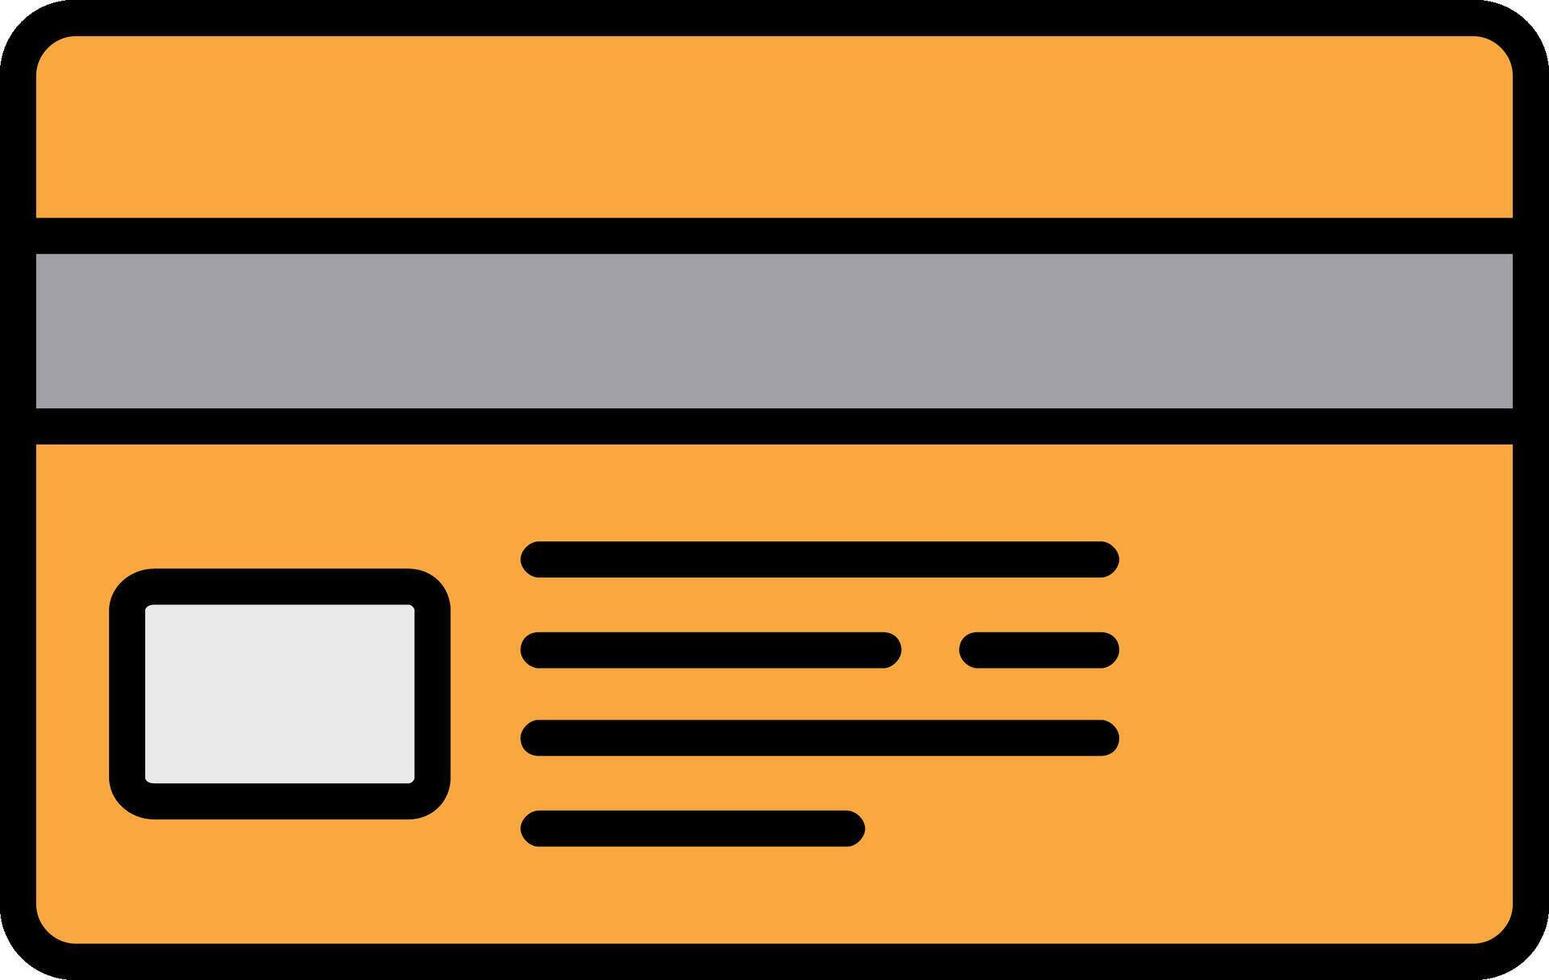 Credit Card Line Filled Icon vector